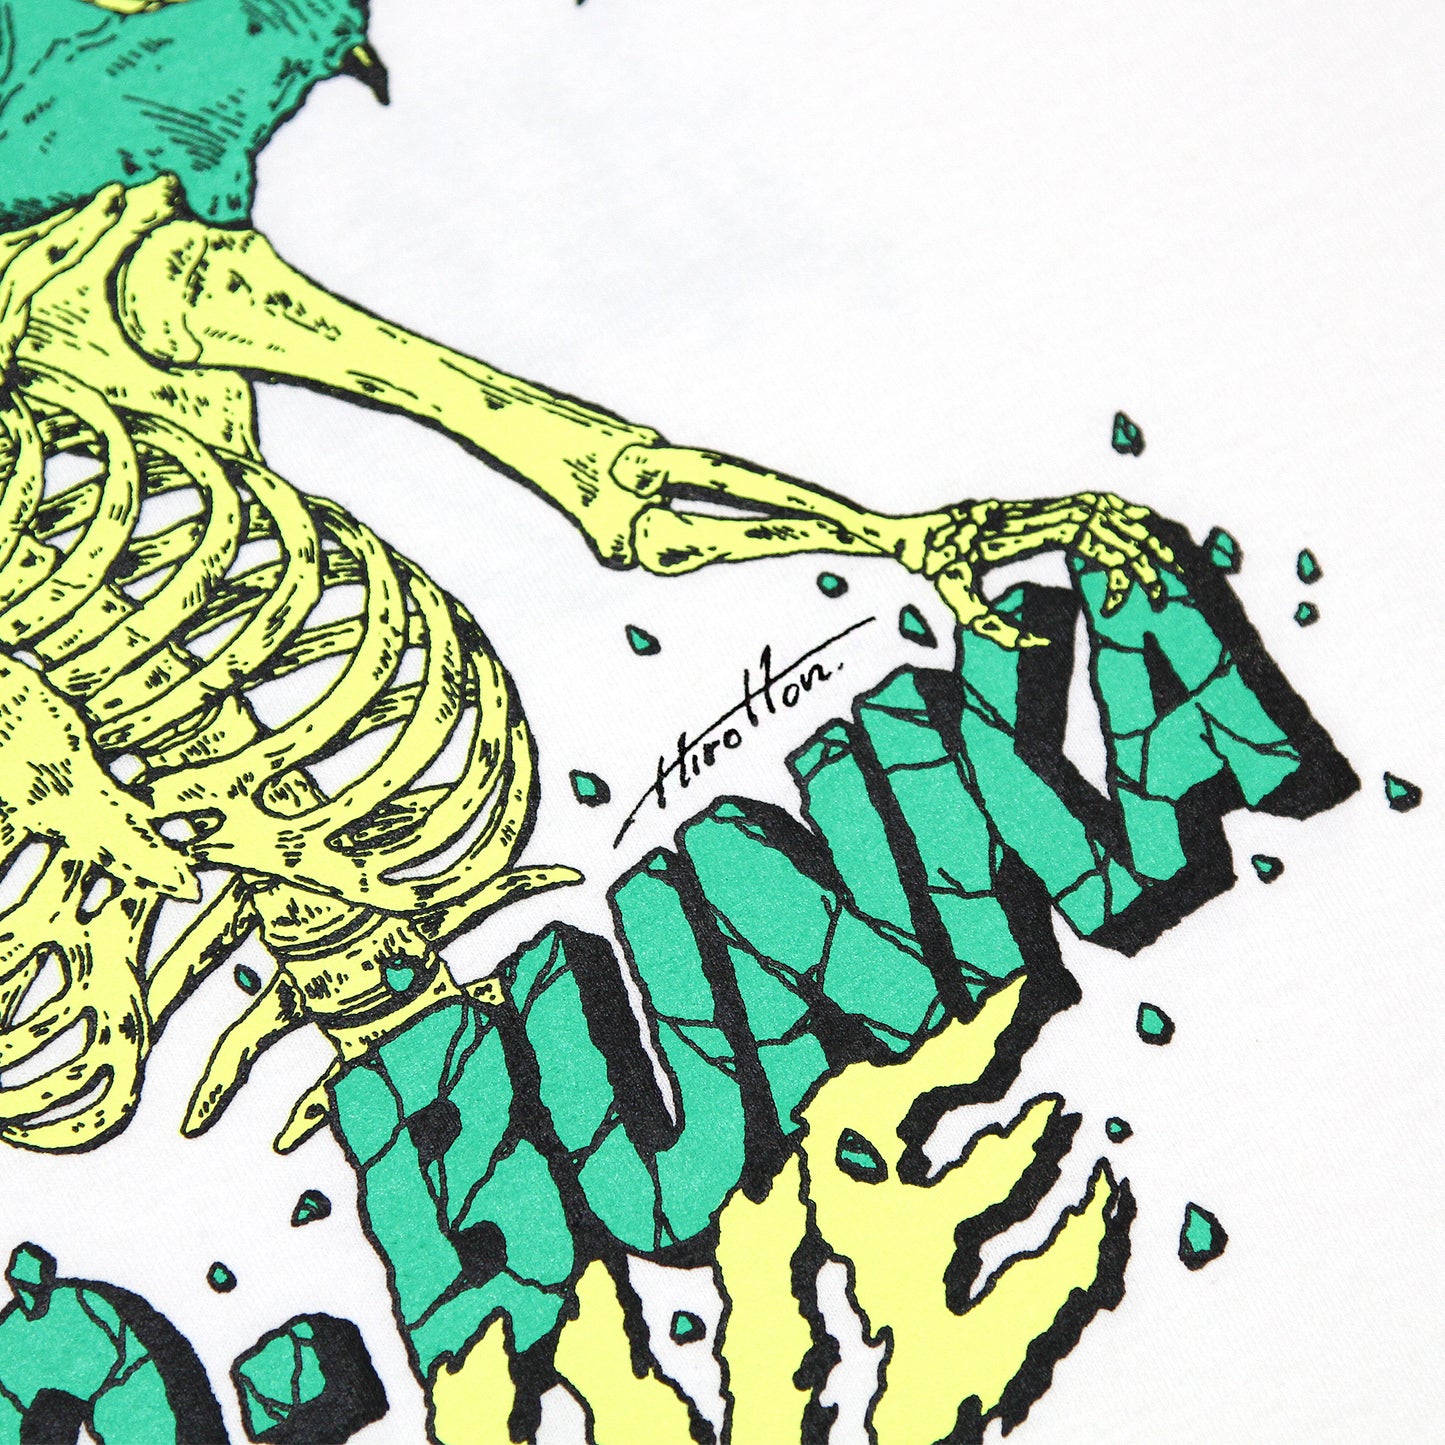 ALIVE INDUSTRY X MOTO-BUNKA - Limited Collaboration T-Shirt Designed by Hirotton/White